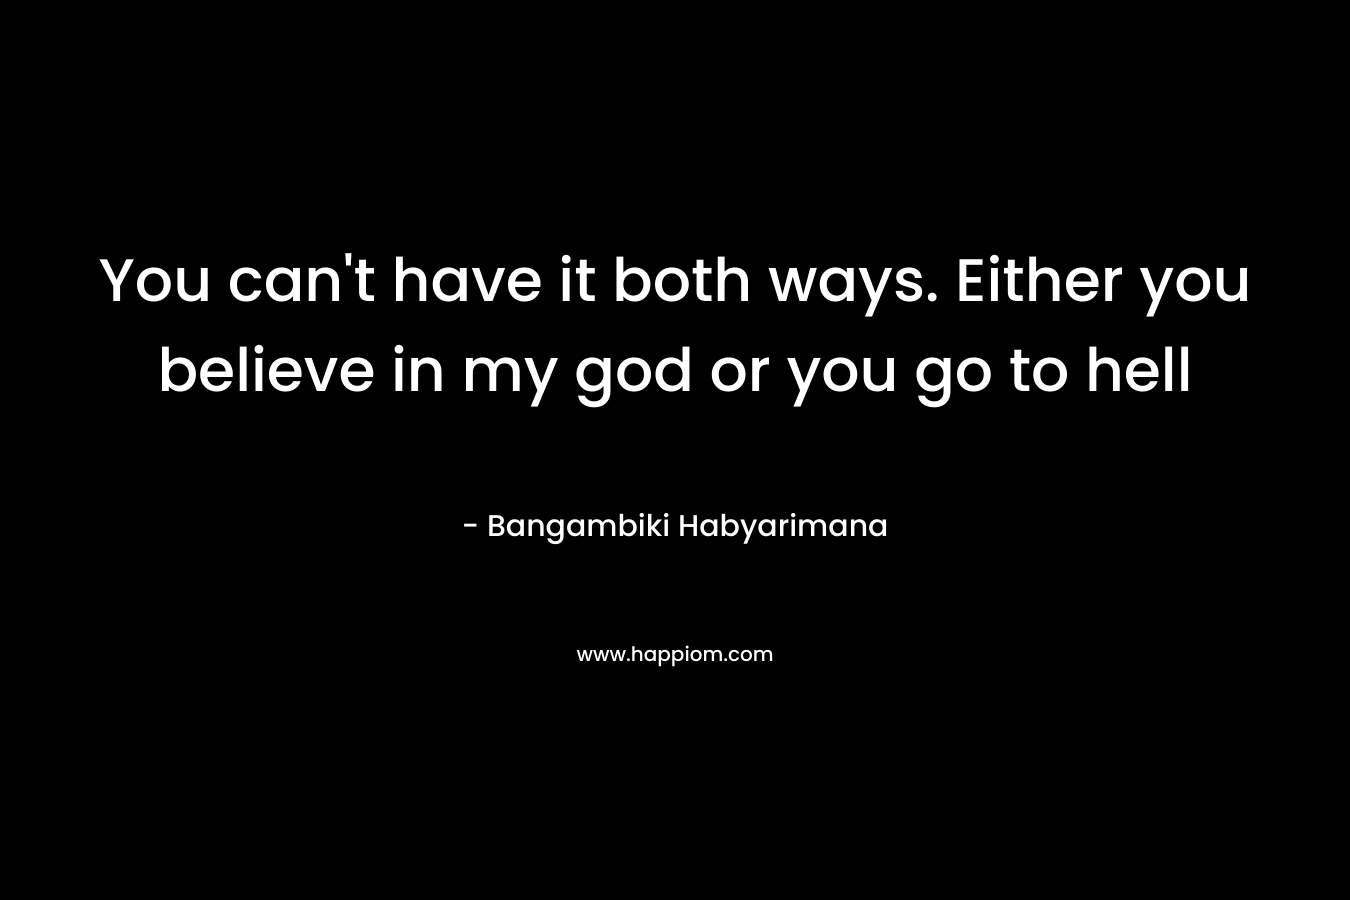 You can't have it both ways. Either you believe in my god or you go to hell